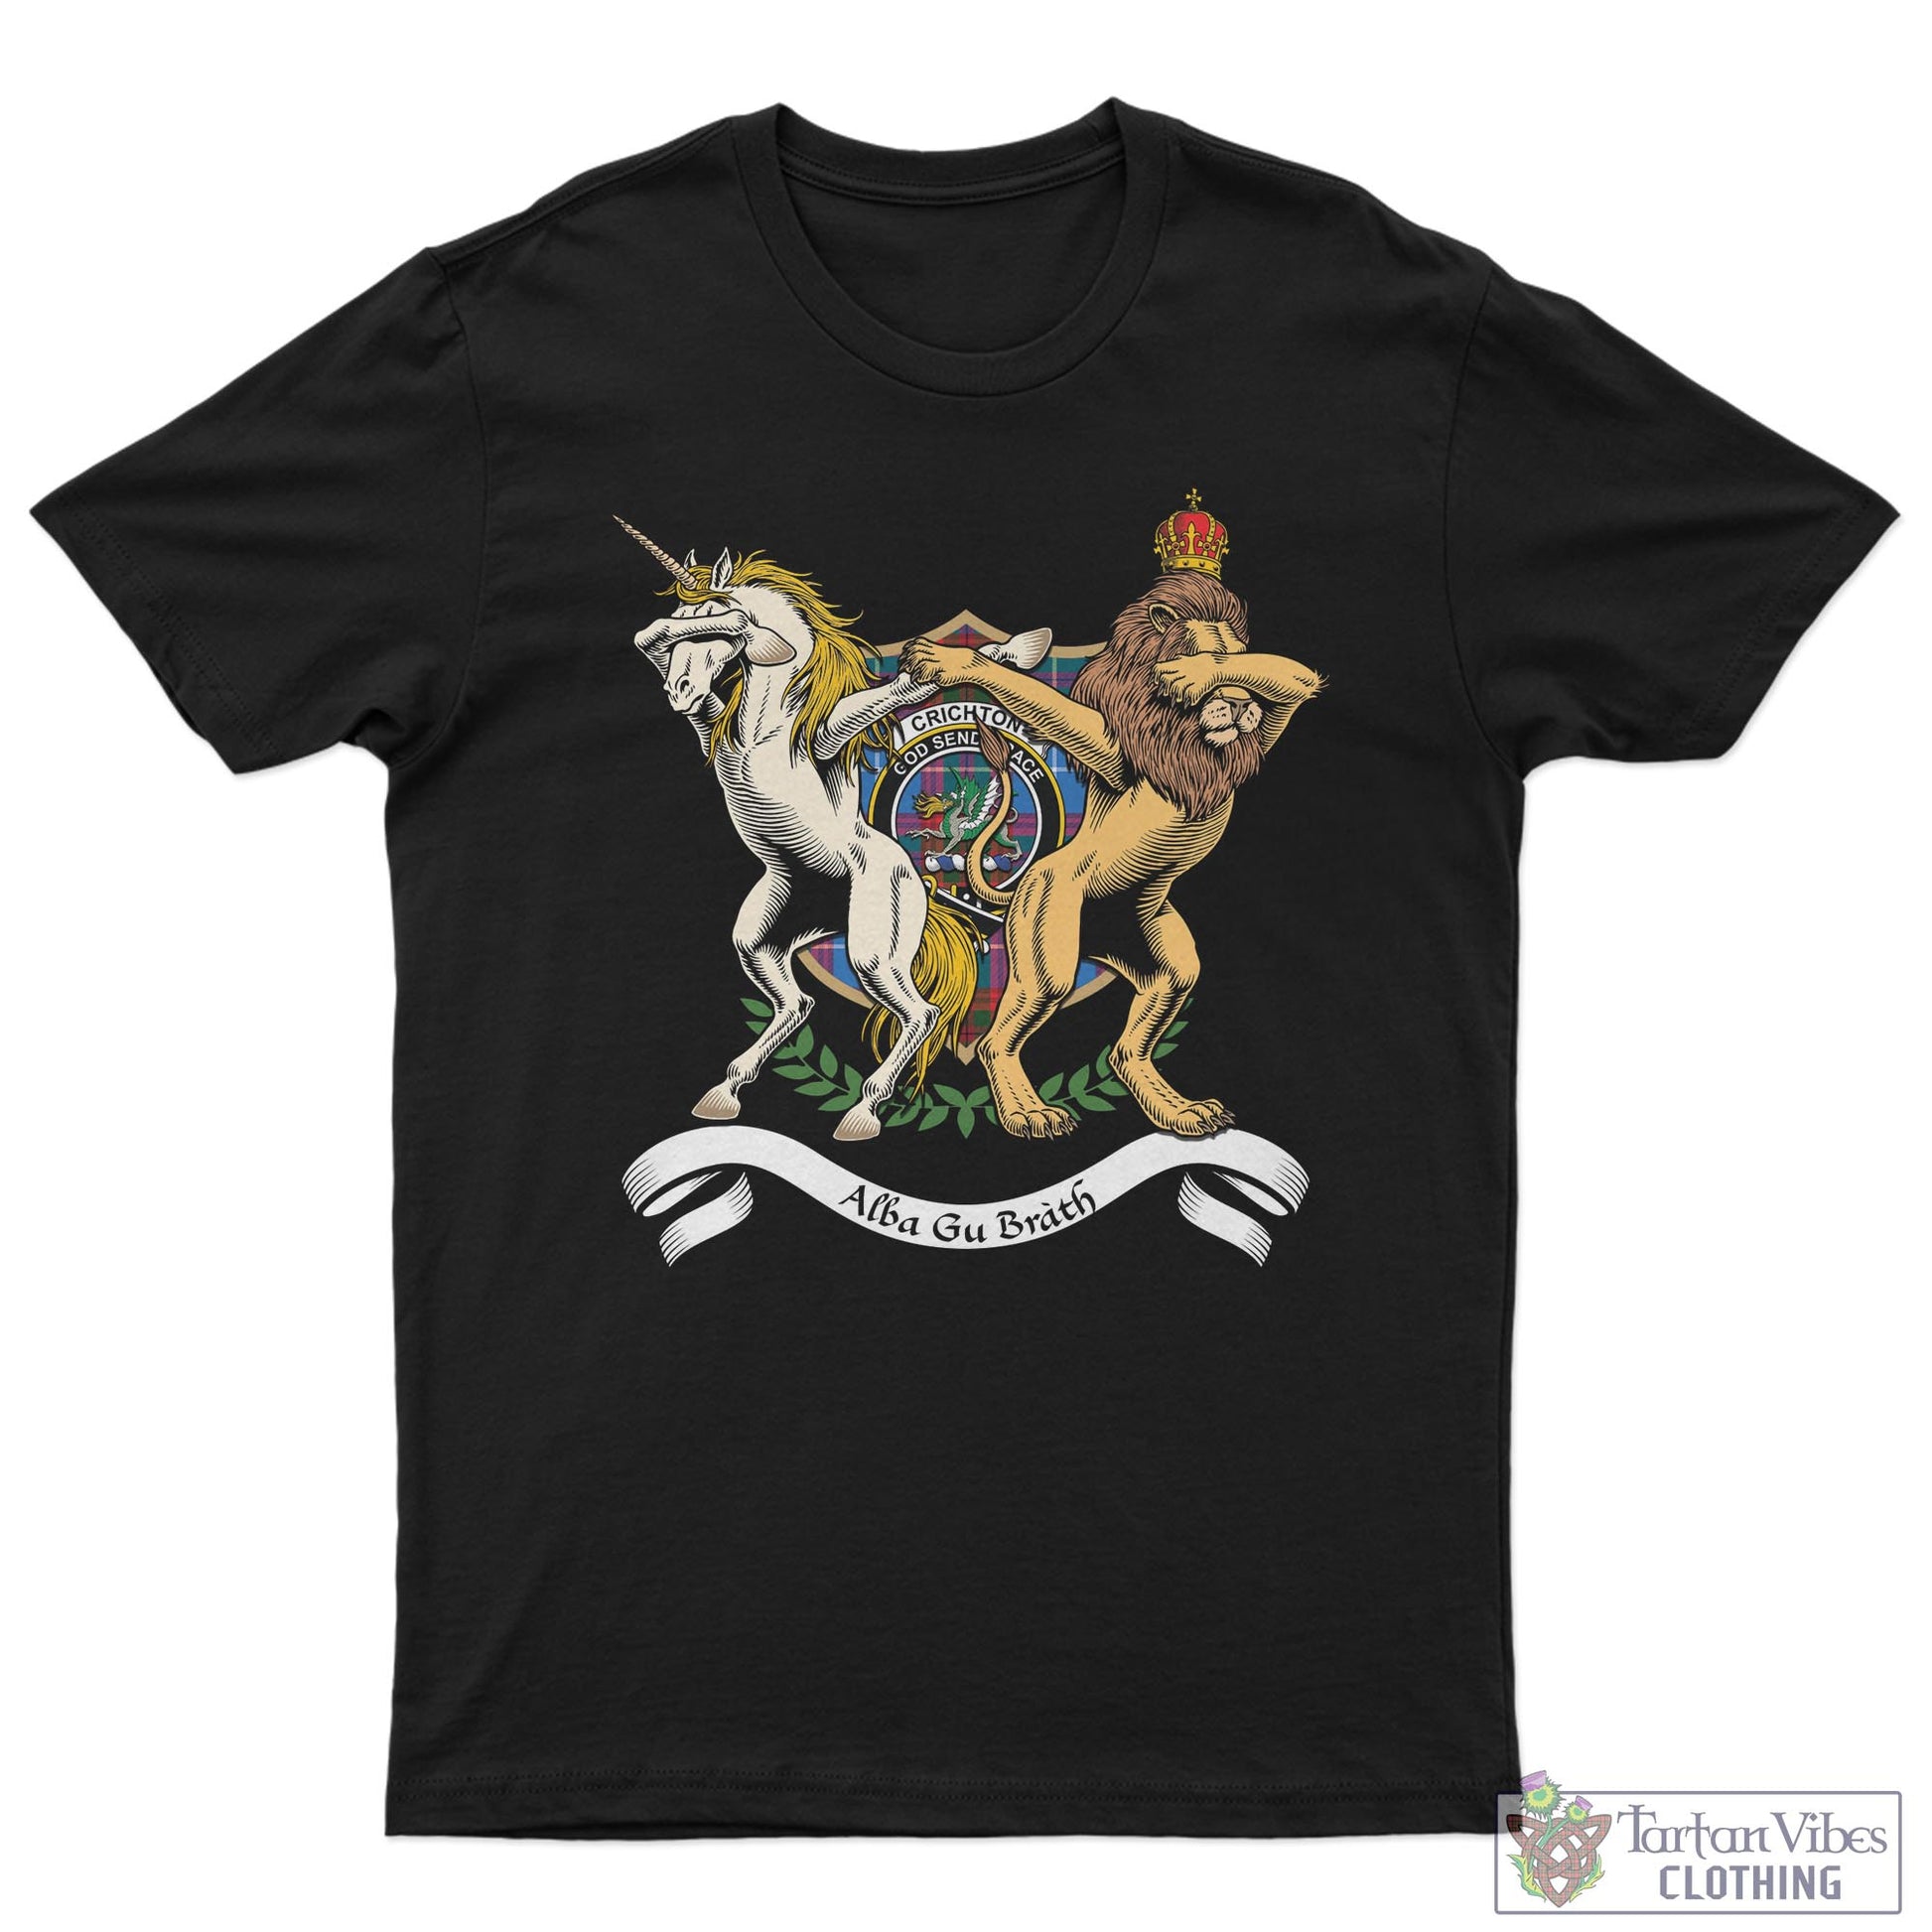 Tartan Vibes Clothing Crichton Family Crest Cotton Men's T-Shirt with Scotland Royal Coat Of Arm Funny Style